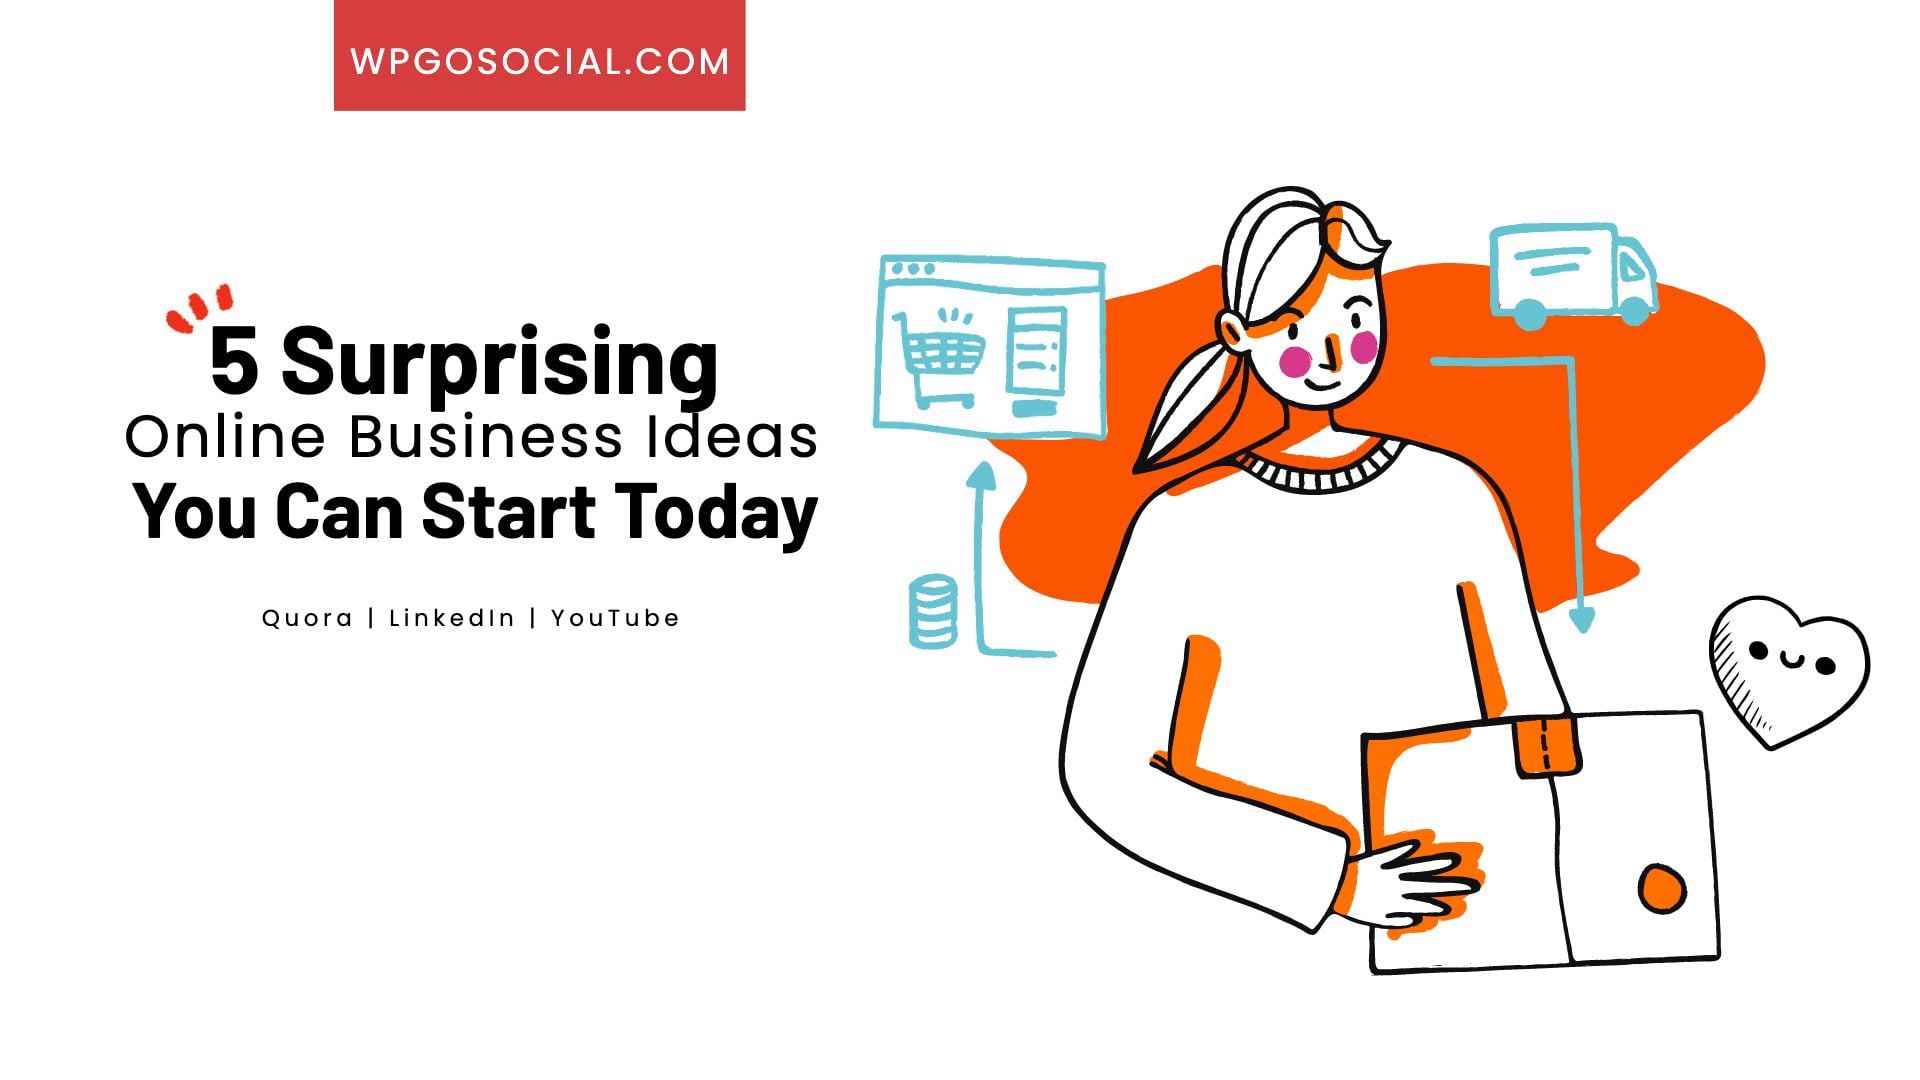 5 Surprising Online Business Ideas You Can Start Today